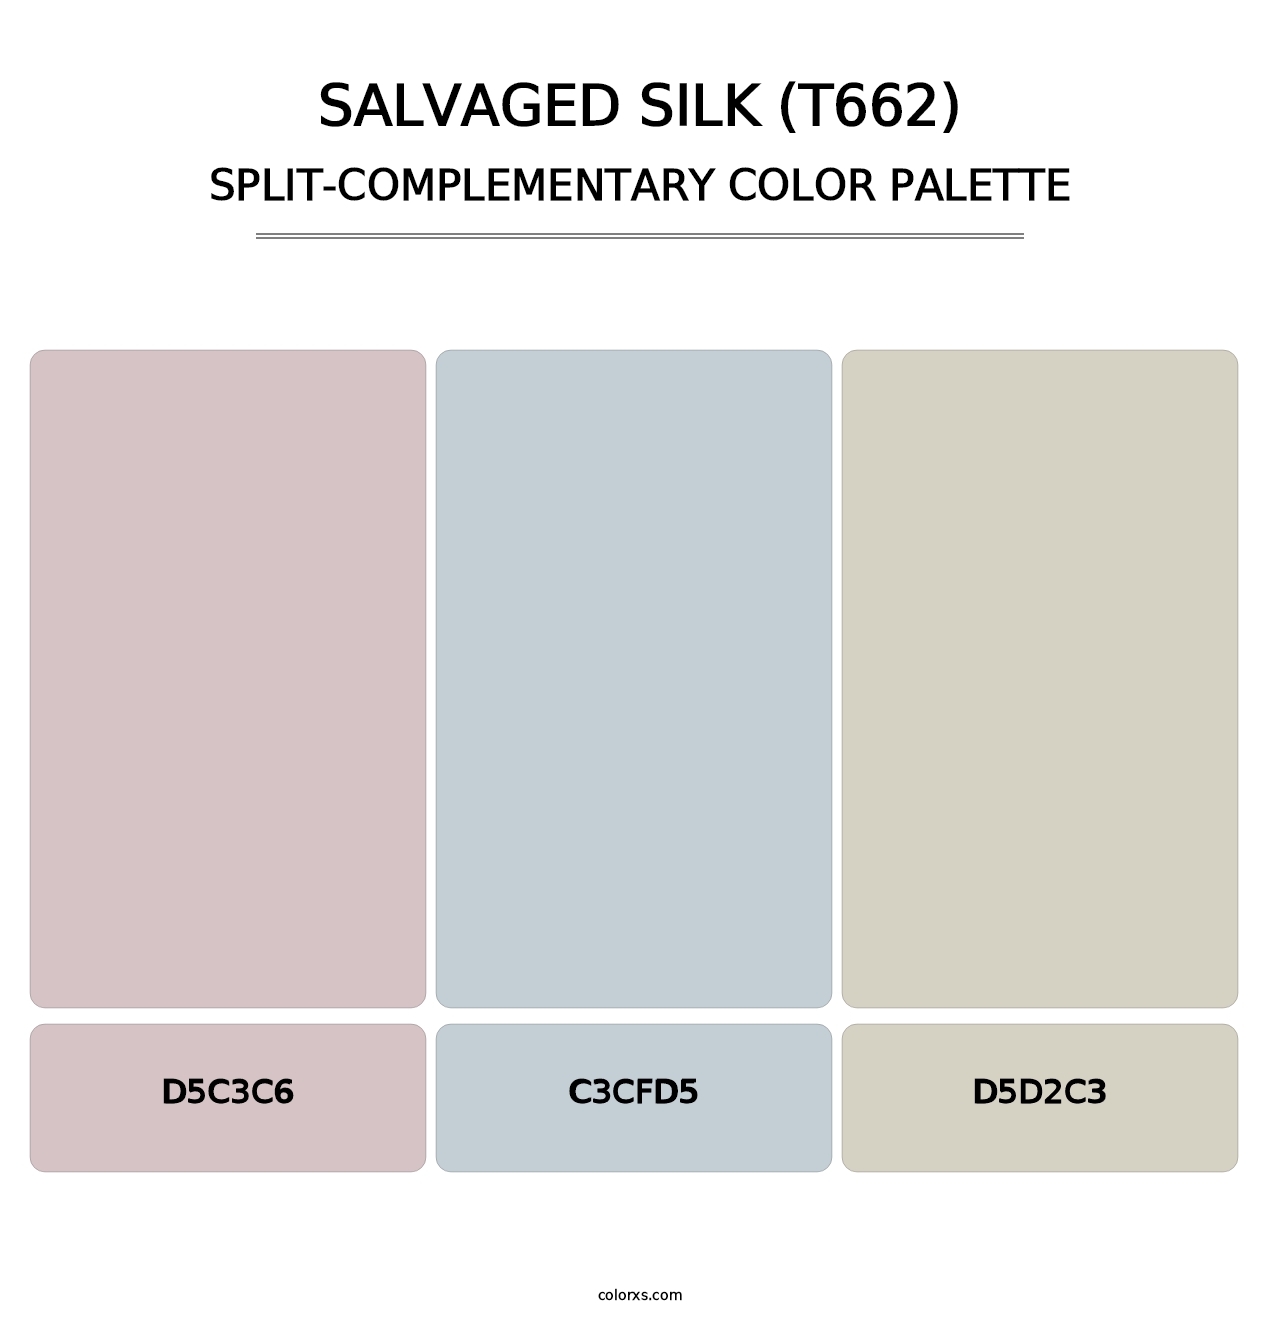 Salvaged Silk (T662) - Split-Complementary Color Palette